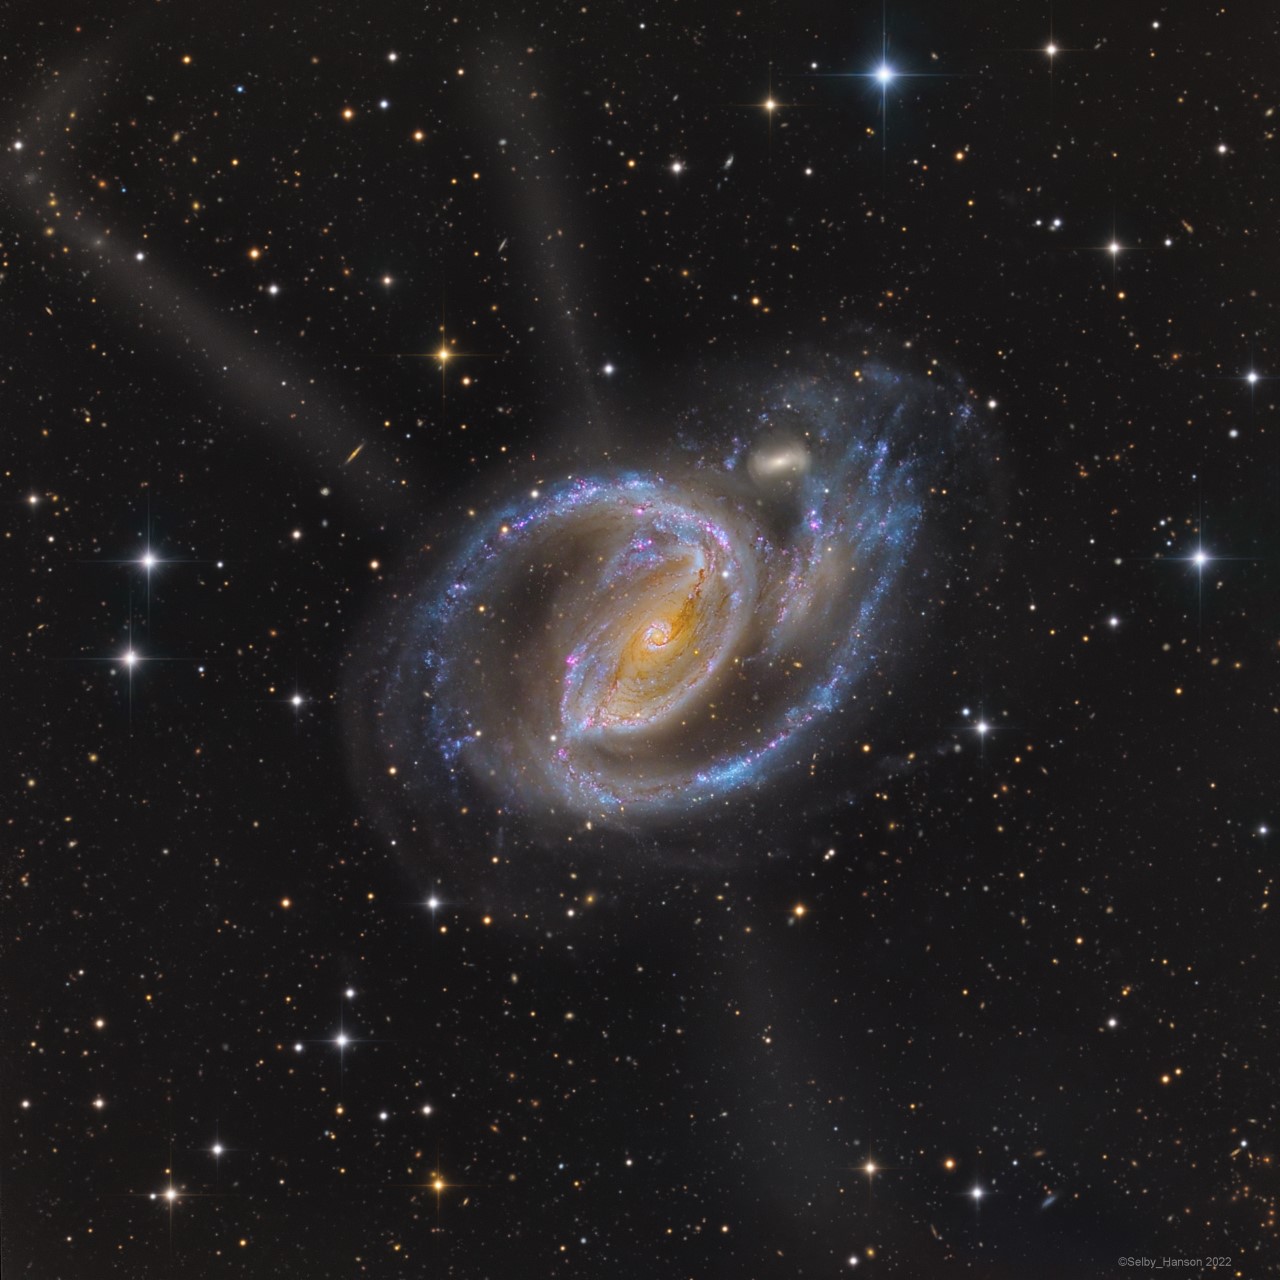 APOD: 2022 November 16 - In the Arms of NGC 1097